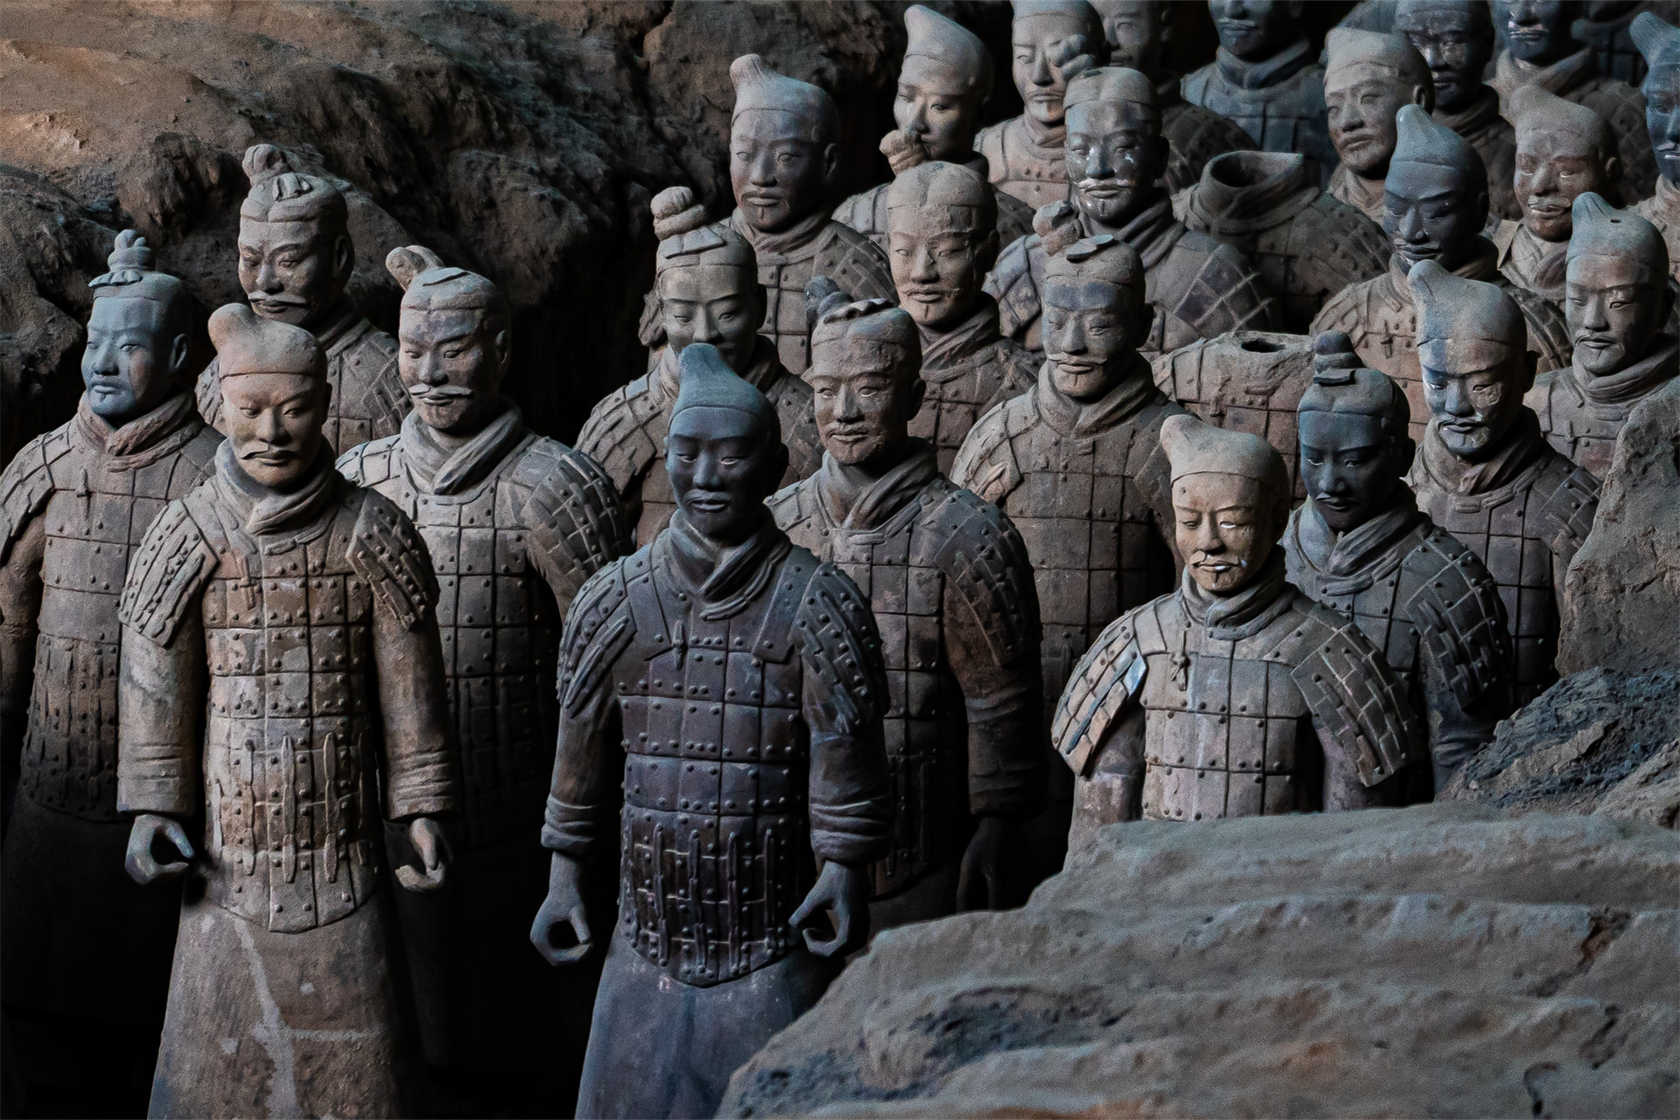 Xian tour package travel agency Terra Cotta Warriors and Horses Museum